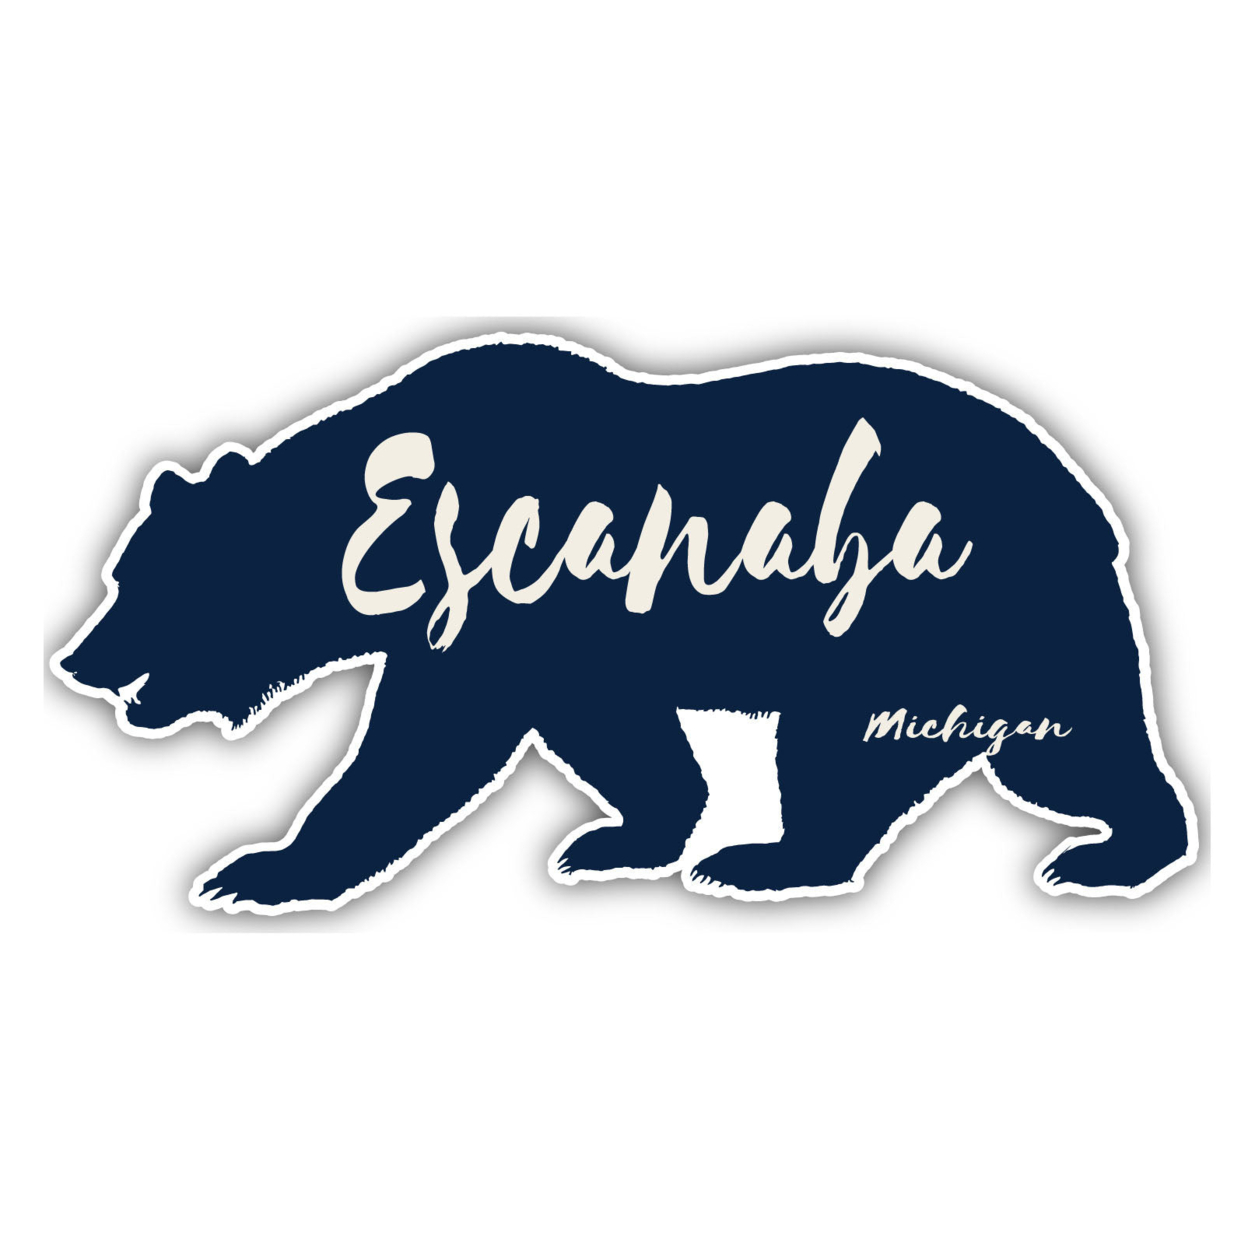 Escanaba Michigan Souvenir Decorative Stickers (Choose Theme And Size) - 4-Pack, 6-Inch, Bear